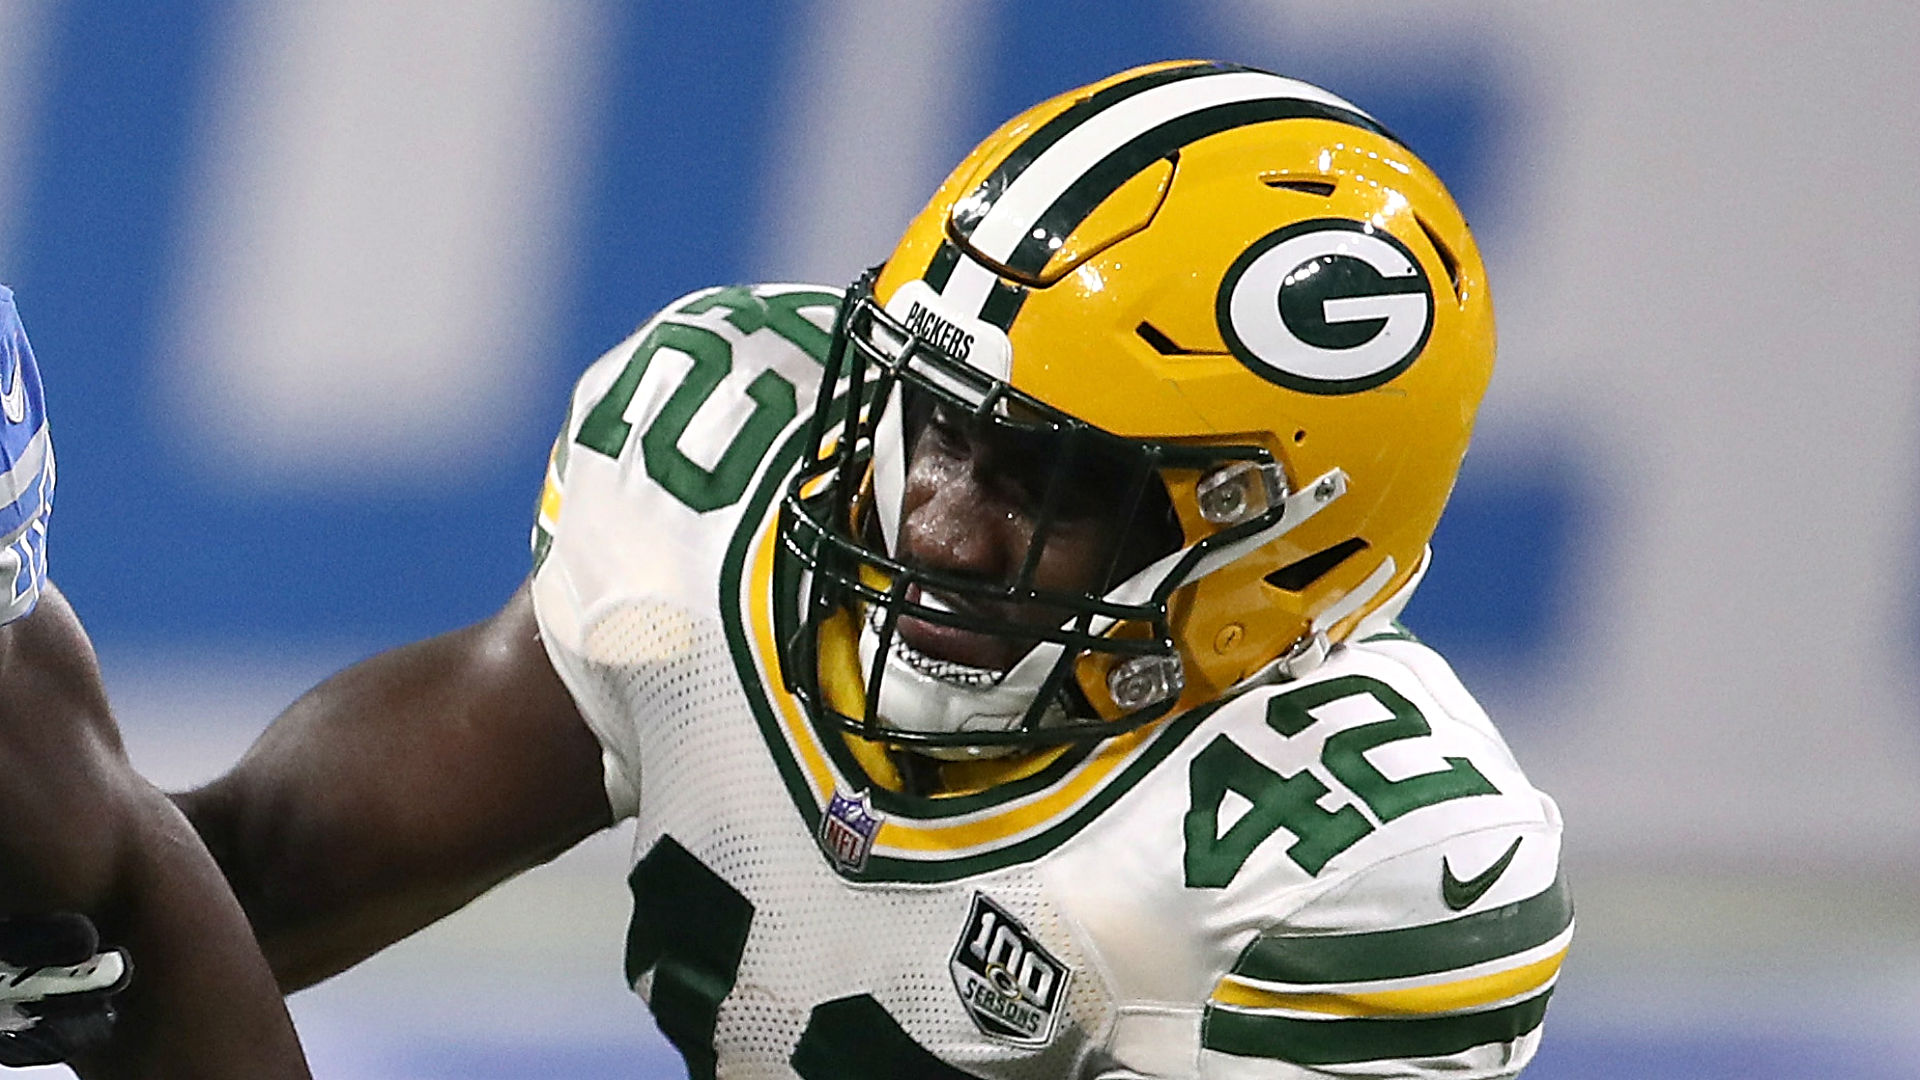 Packers' Oren Burks might have torn pec, report says